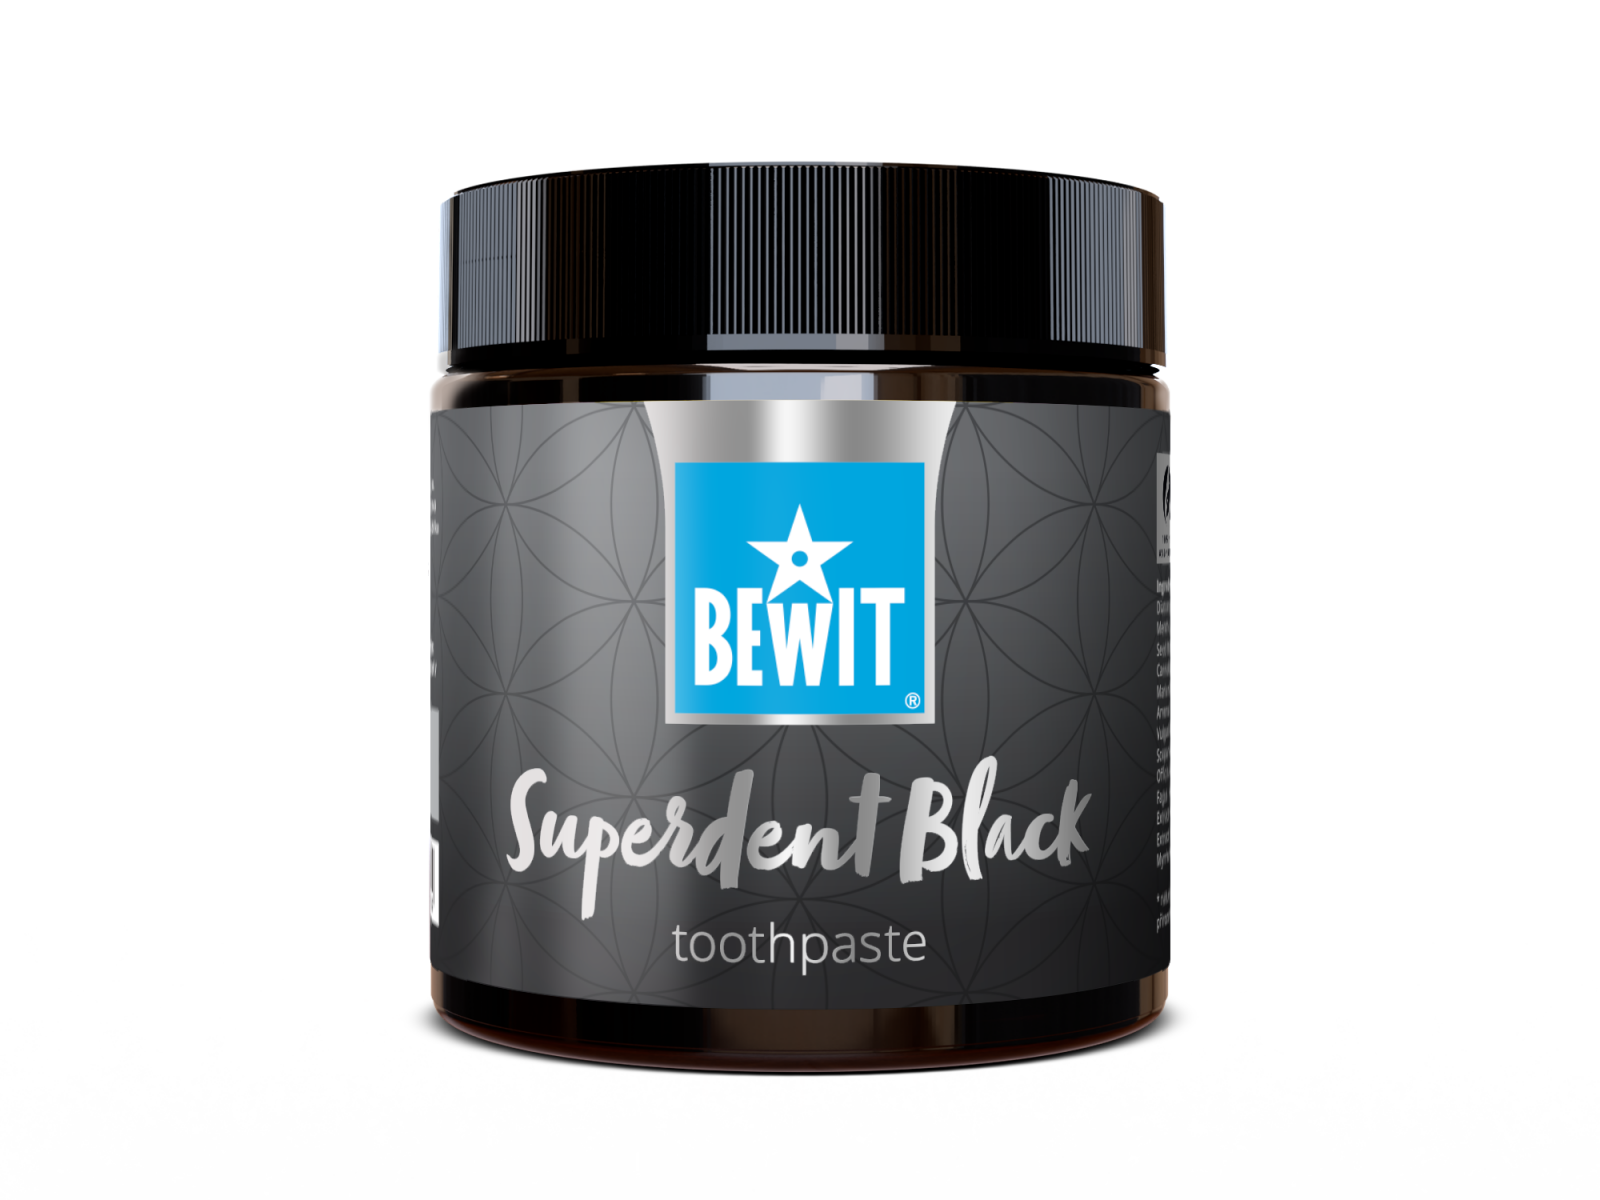 BEWIT Superdent Black - Activated charcoal toothpaste - 1